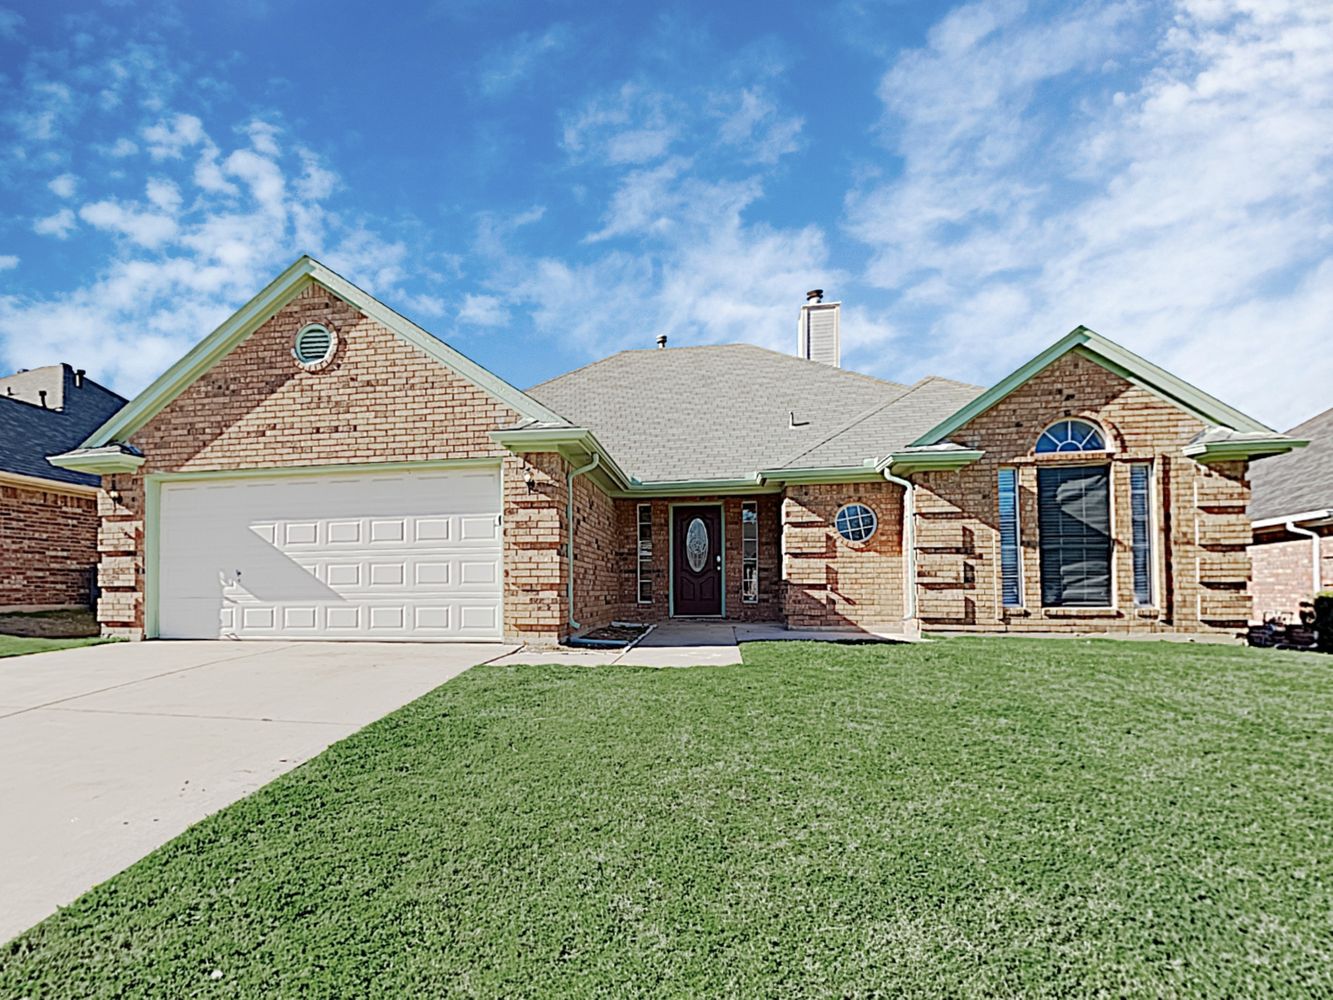 Charming home with a two-car garage at Invitation Homes Houston.